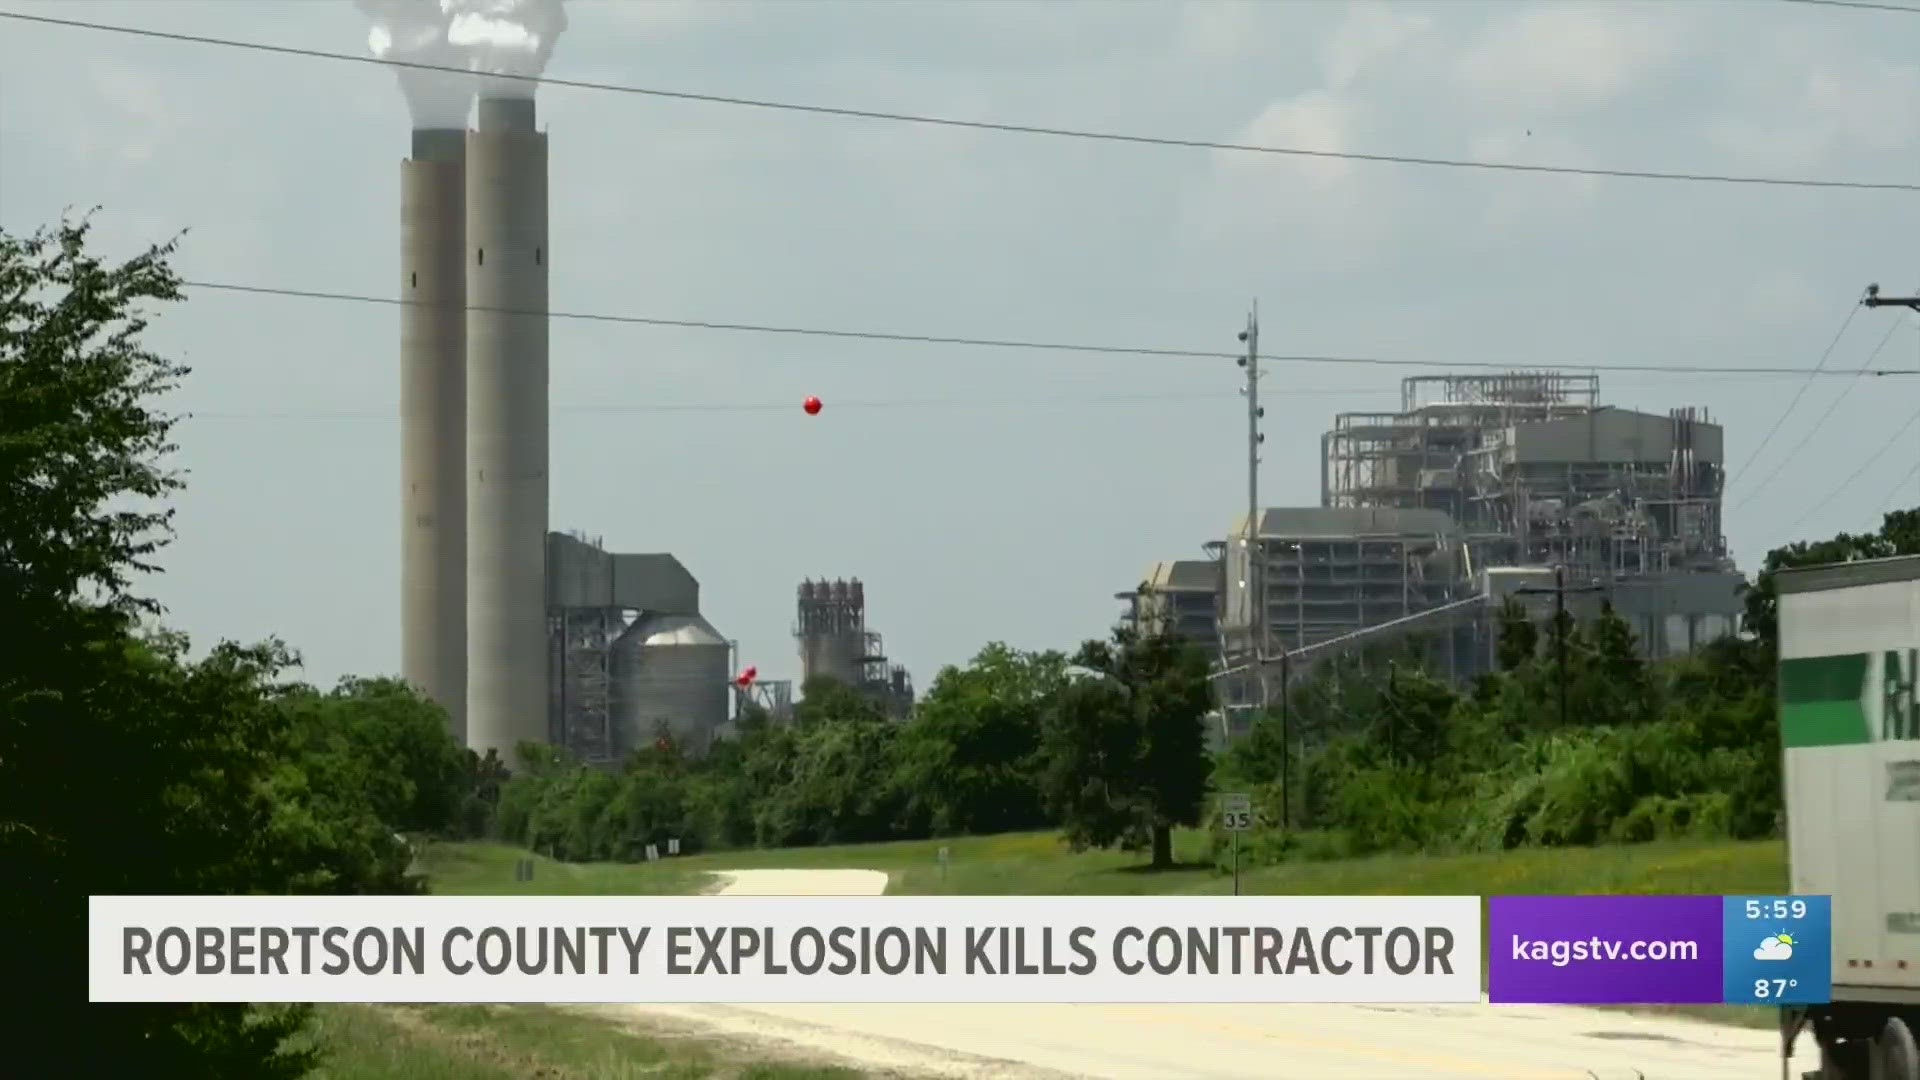 Robertson County Emergency Management said that other than the person who died in the boiler explosion, no others were injured and the incident was "under control".